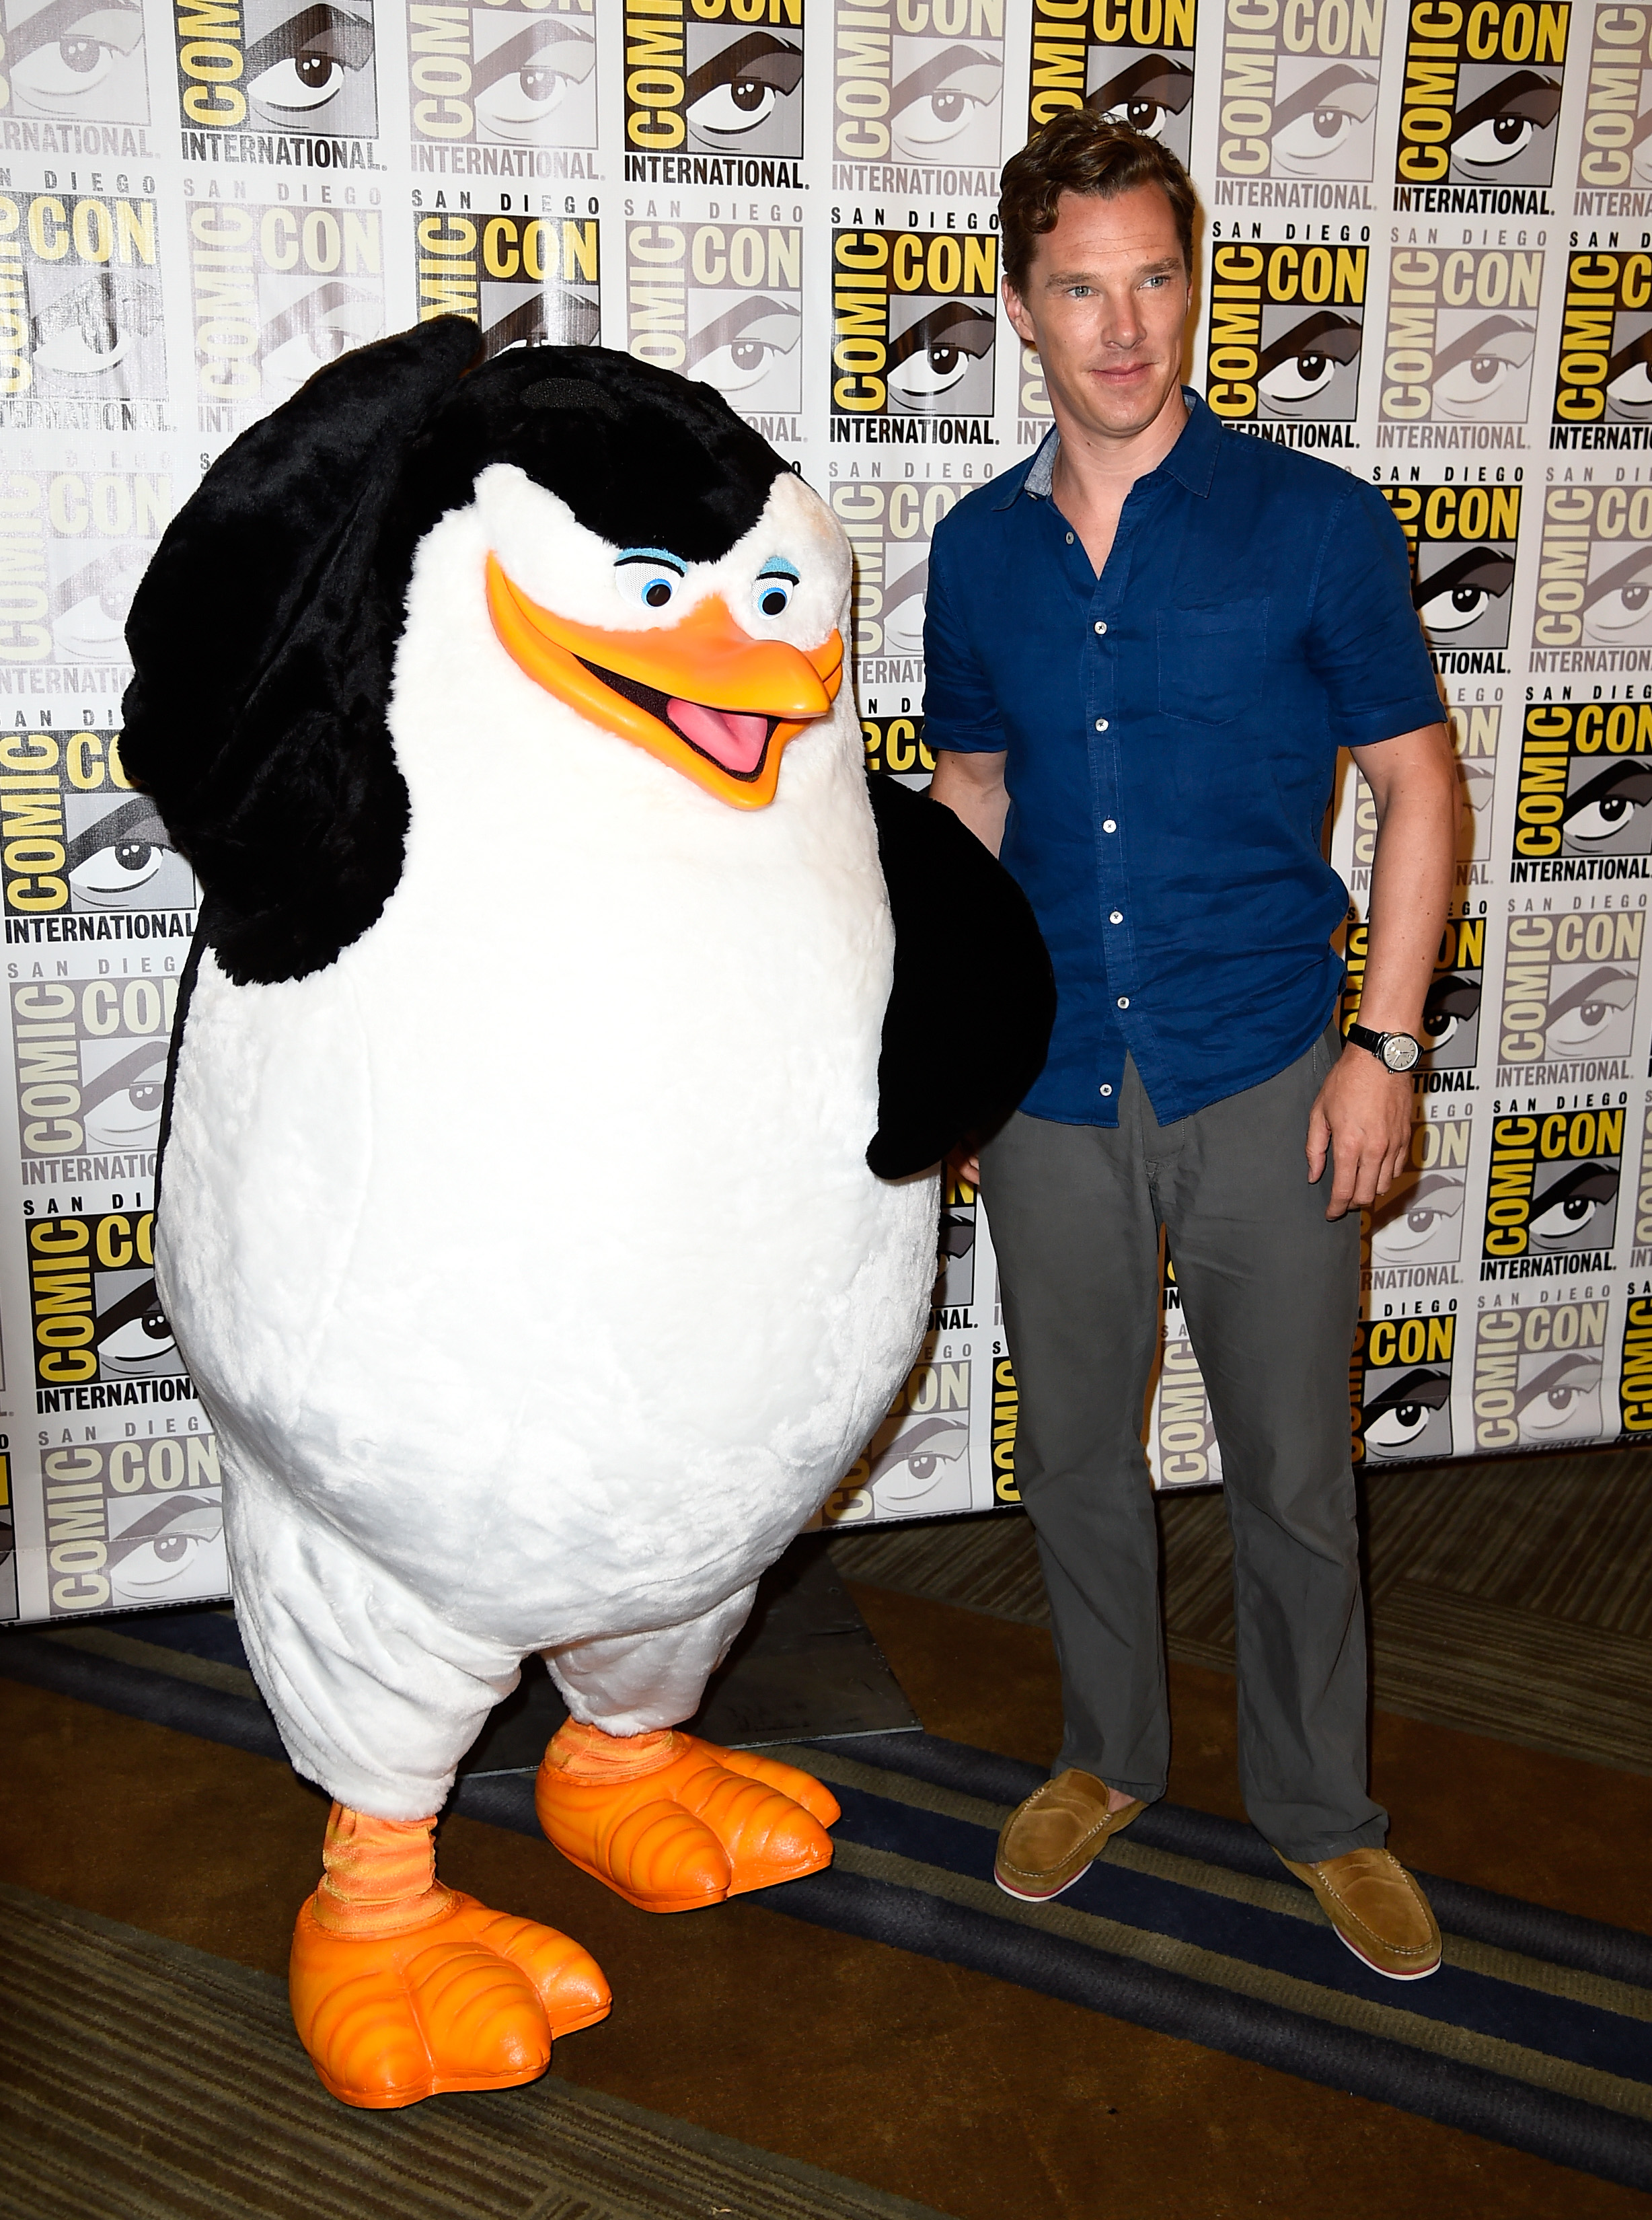 humane synonymordbog kerne Benedict Cumberbatch Can't Say The Word "Penguin" & It's Stupidly Adorable  — VIDEO